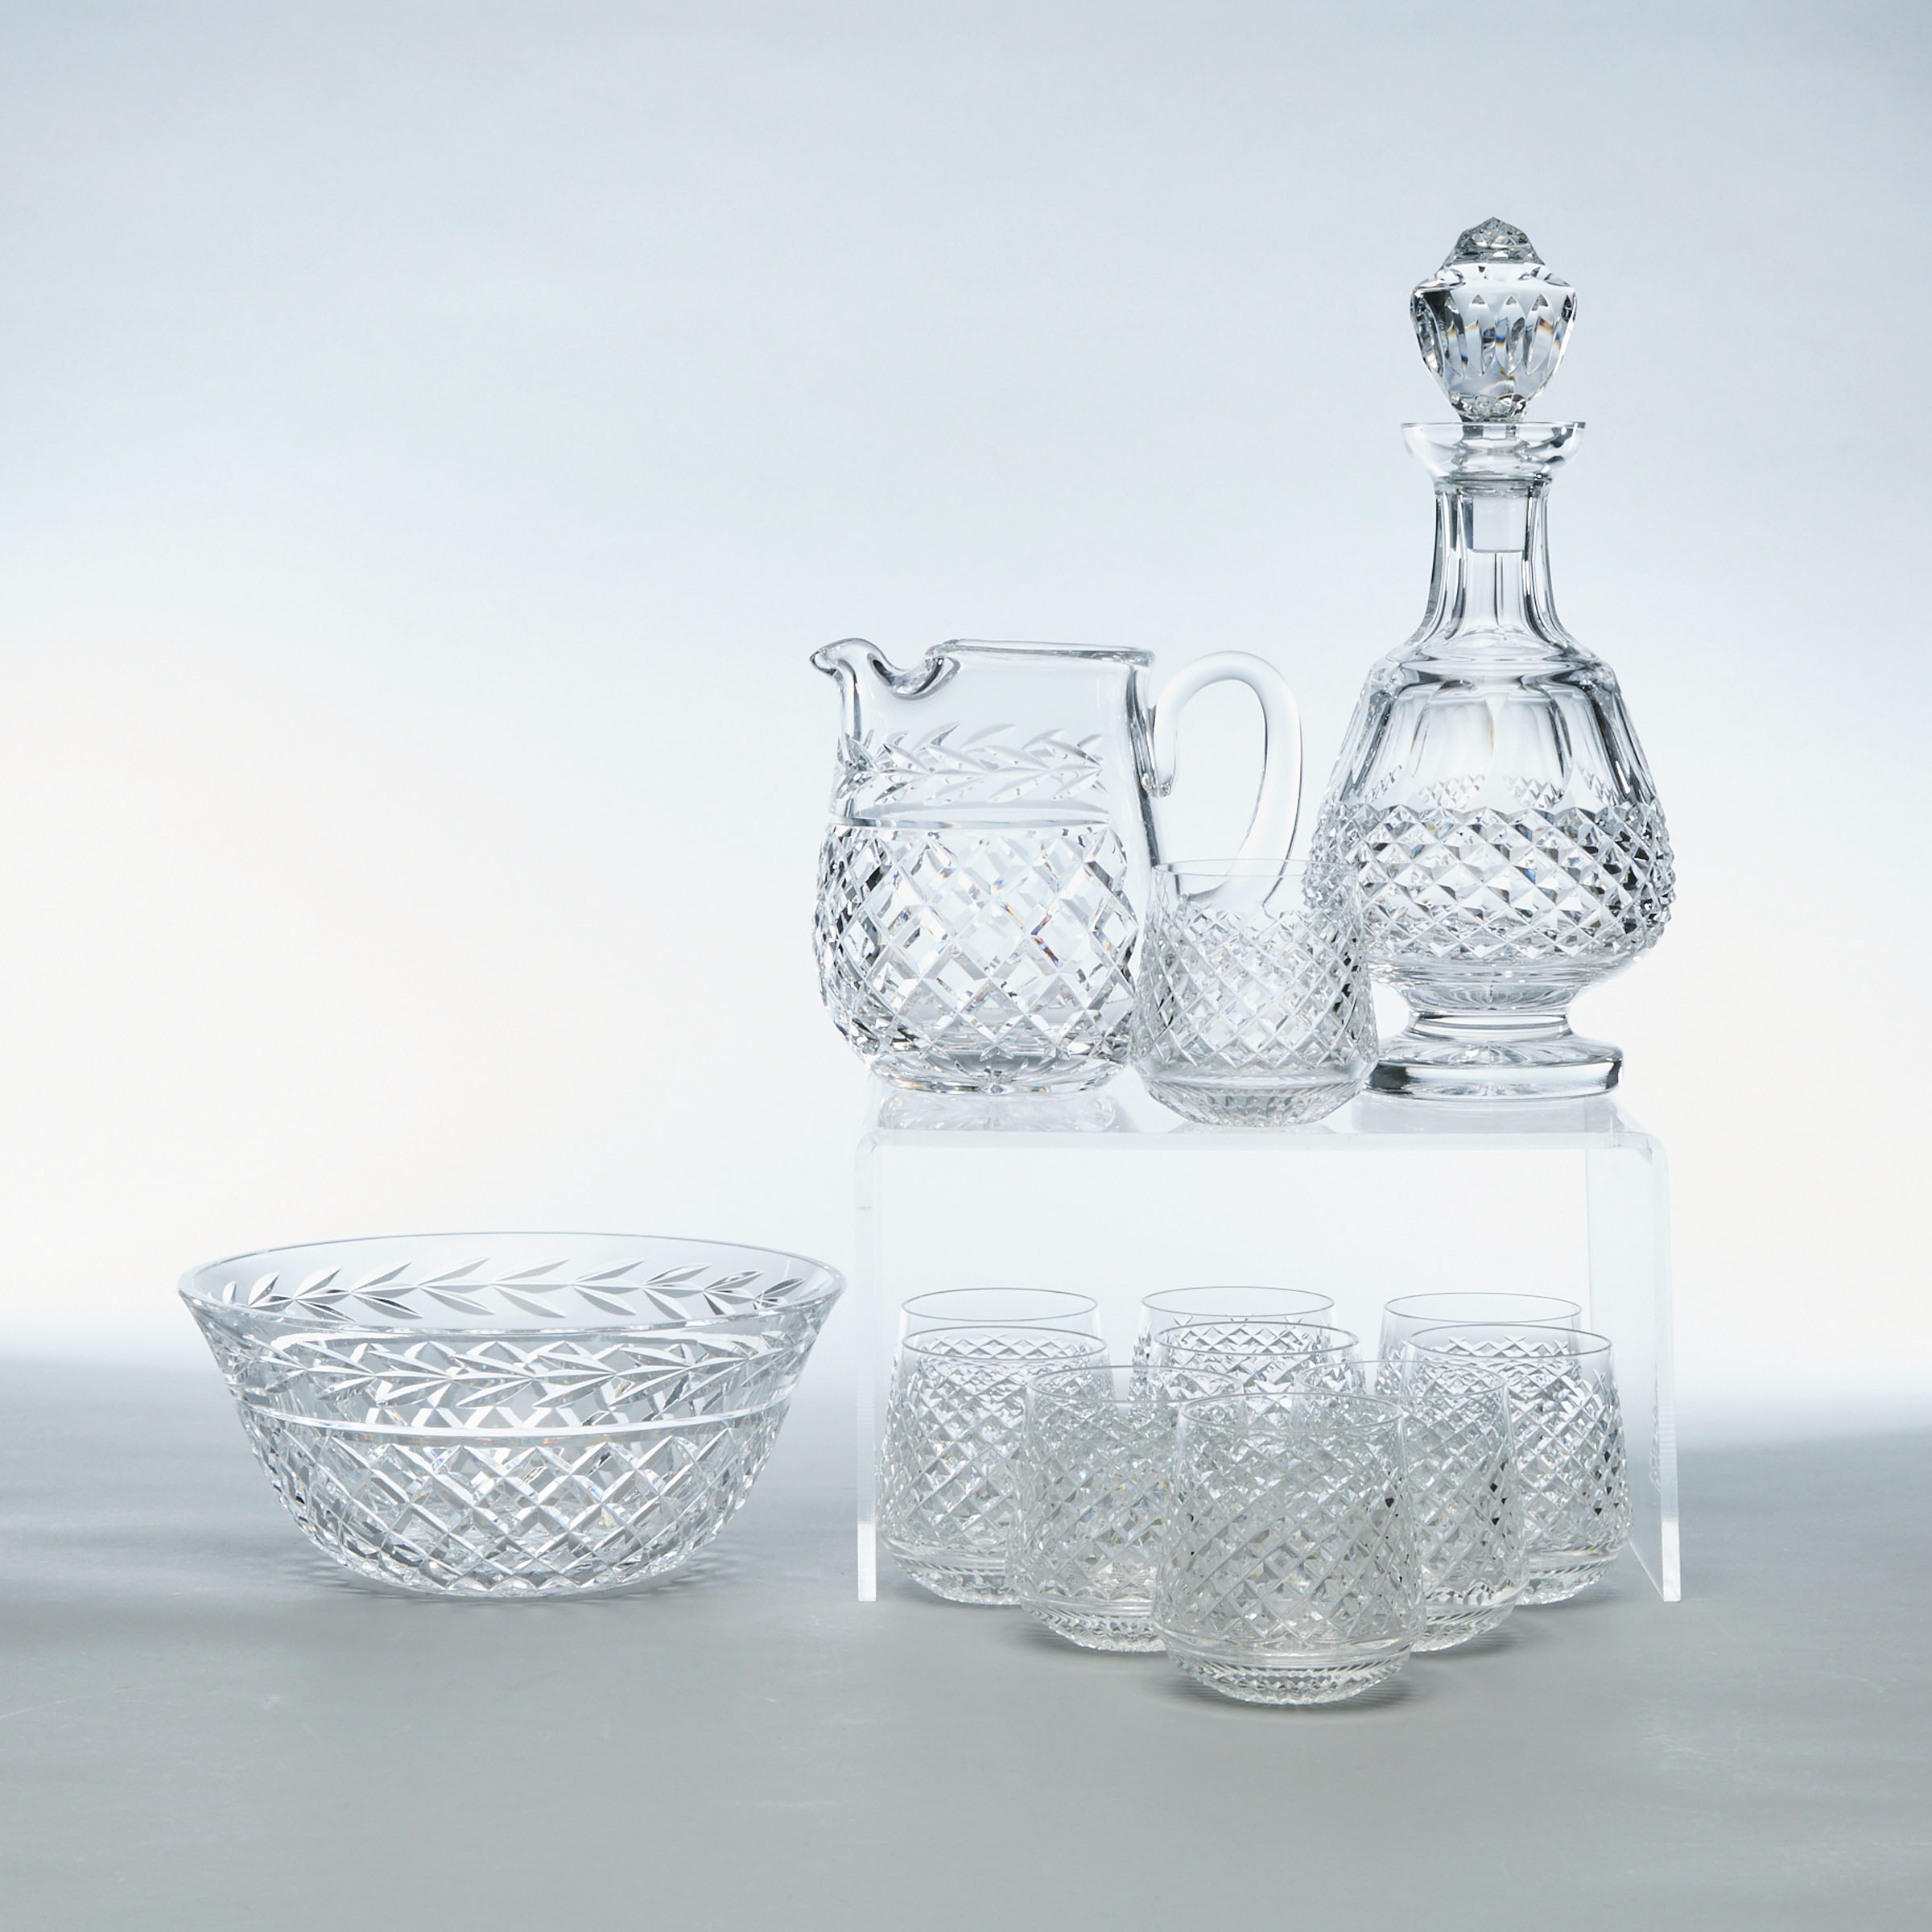 Ten Waterford 'Alana' Pattern Cut Glass Tumblers together with a Decanter, Pitcher, and Bowl, 20th century